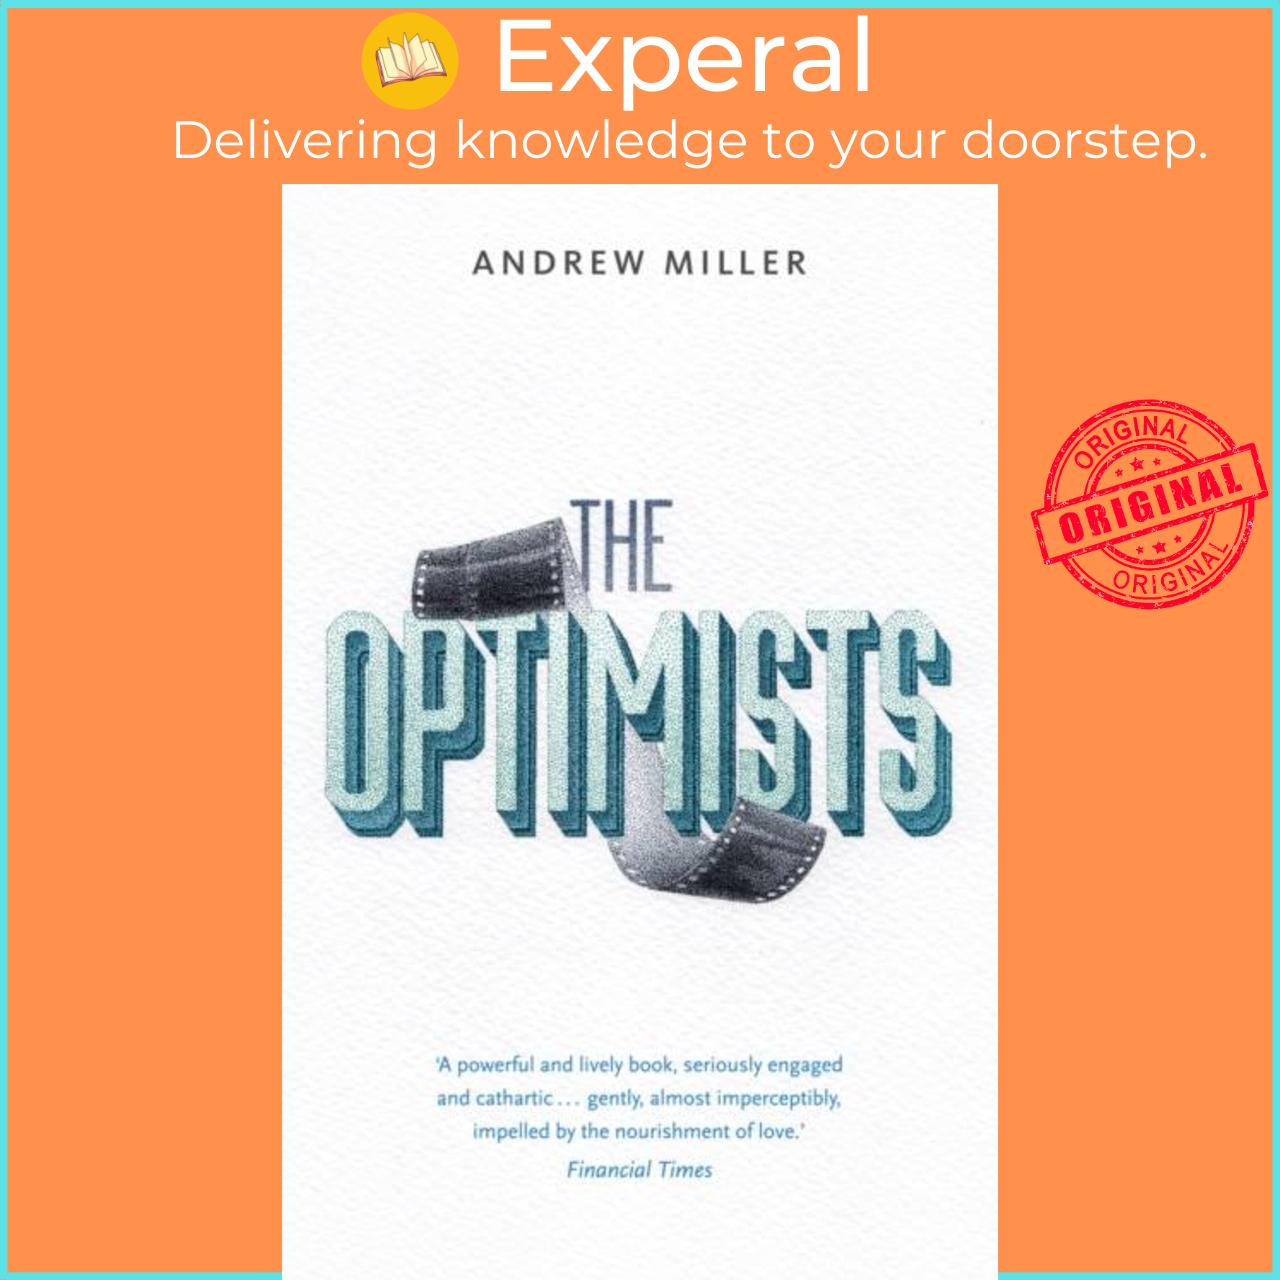 Sách - The Optimists by Andrew Miller (UK edition, paperback)